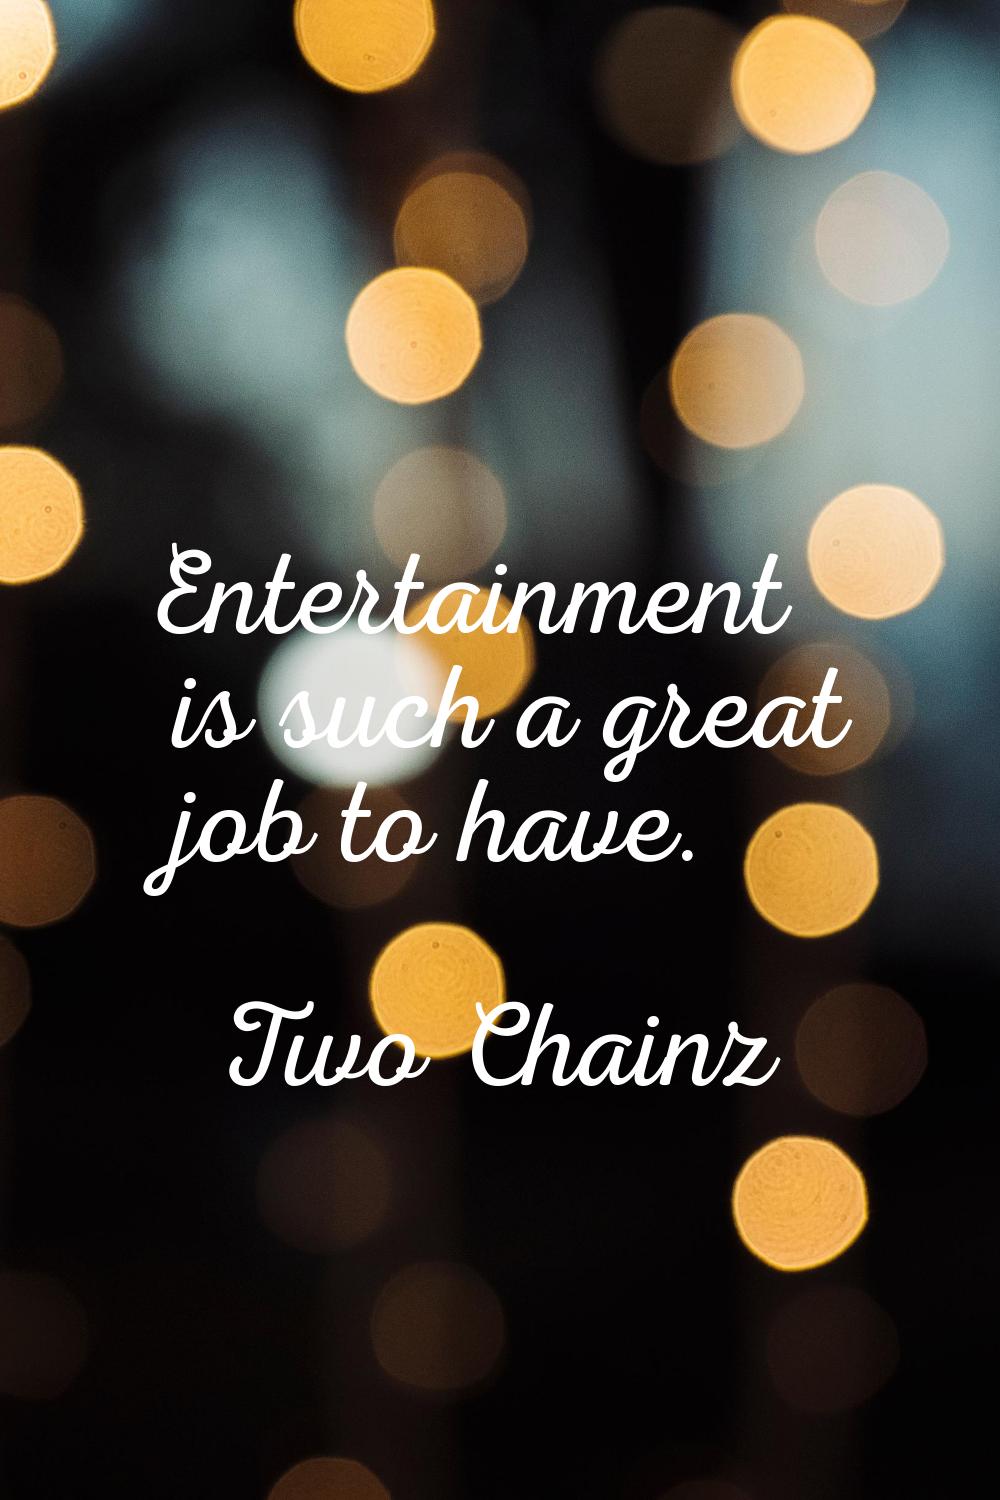 Entertainment is such a great job to have.